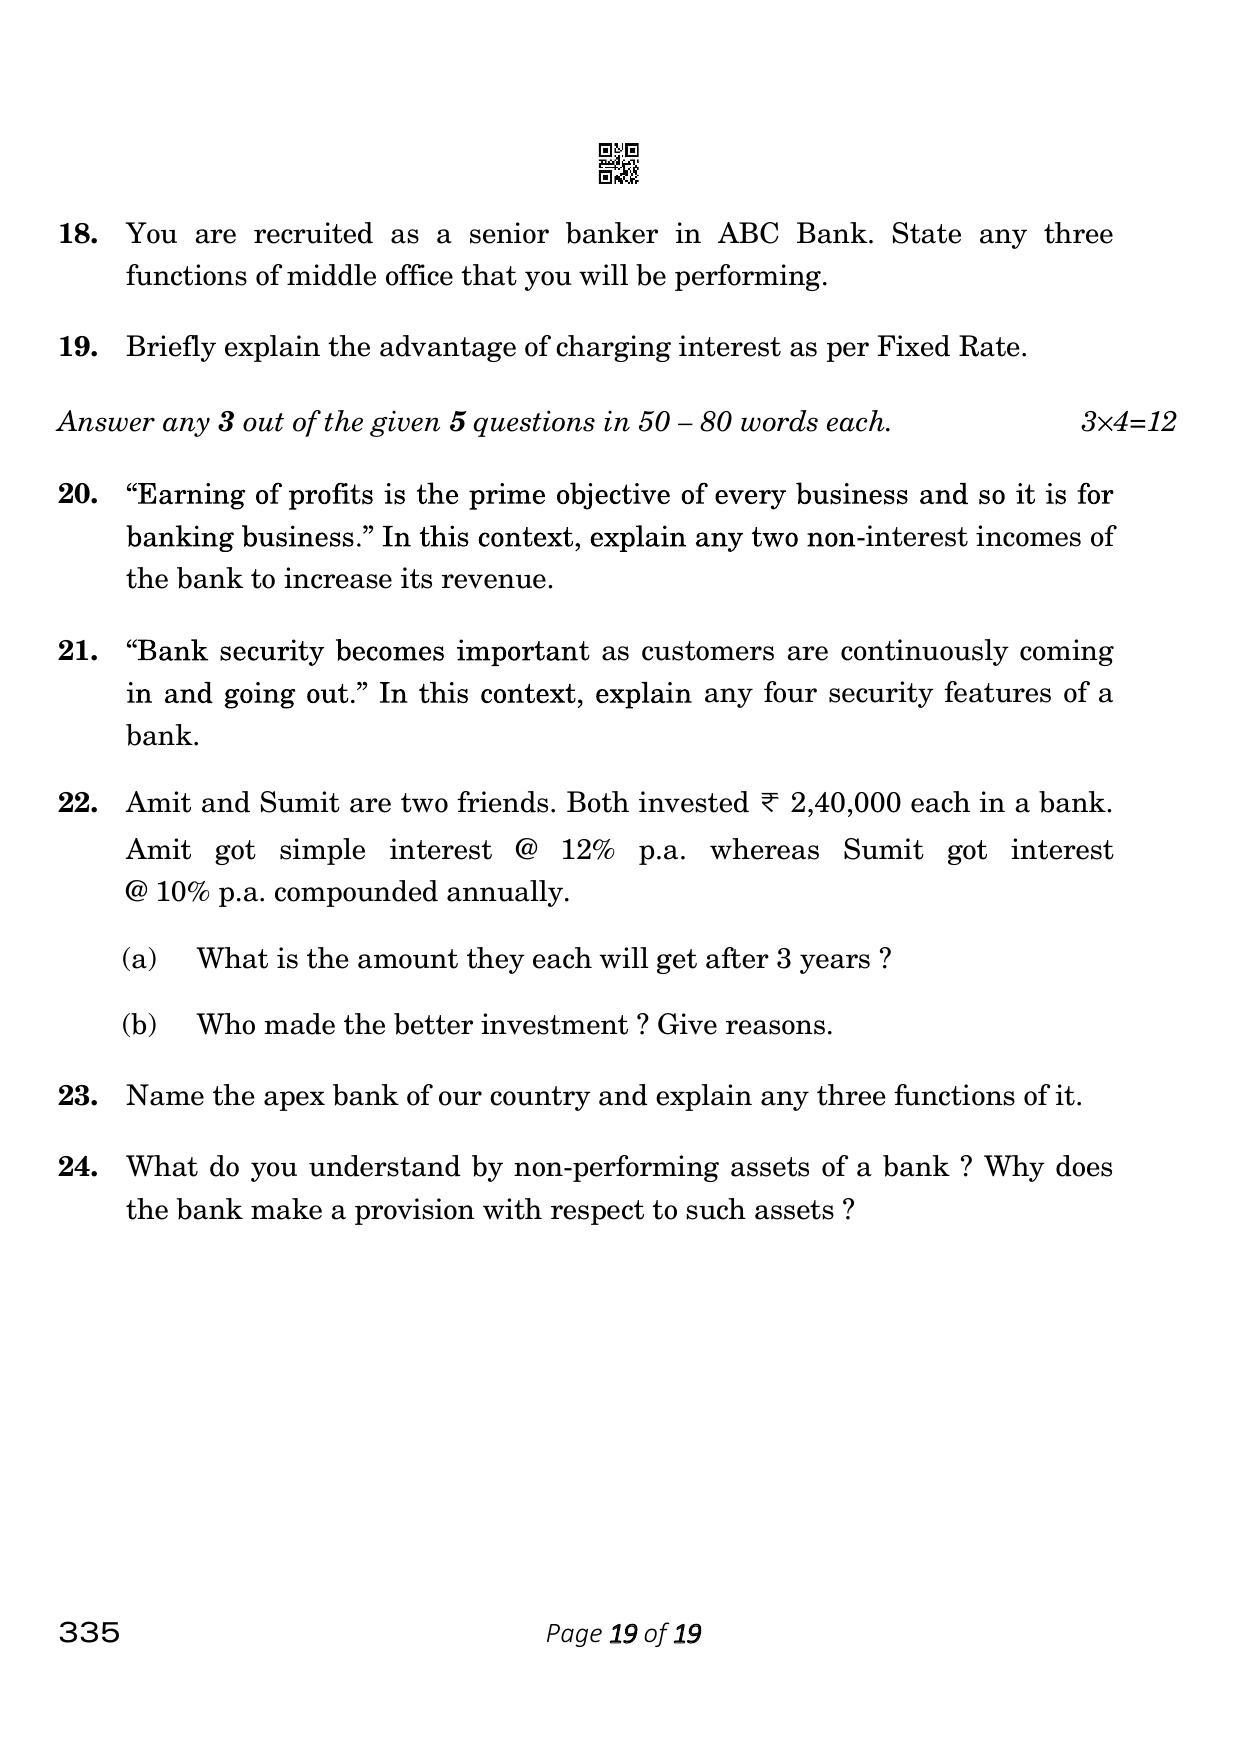 CBSE Class 12 335_Banking 2023 Question Paper - Page 19